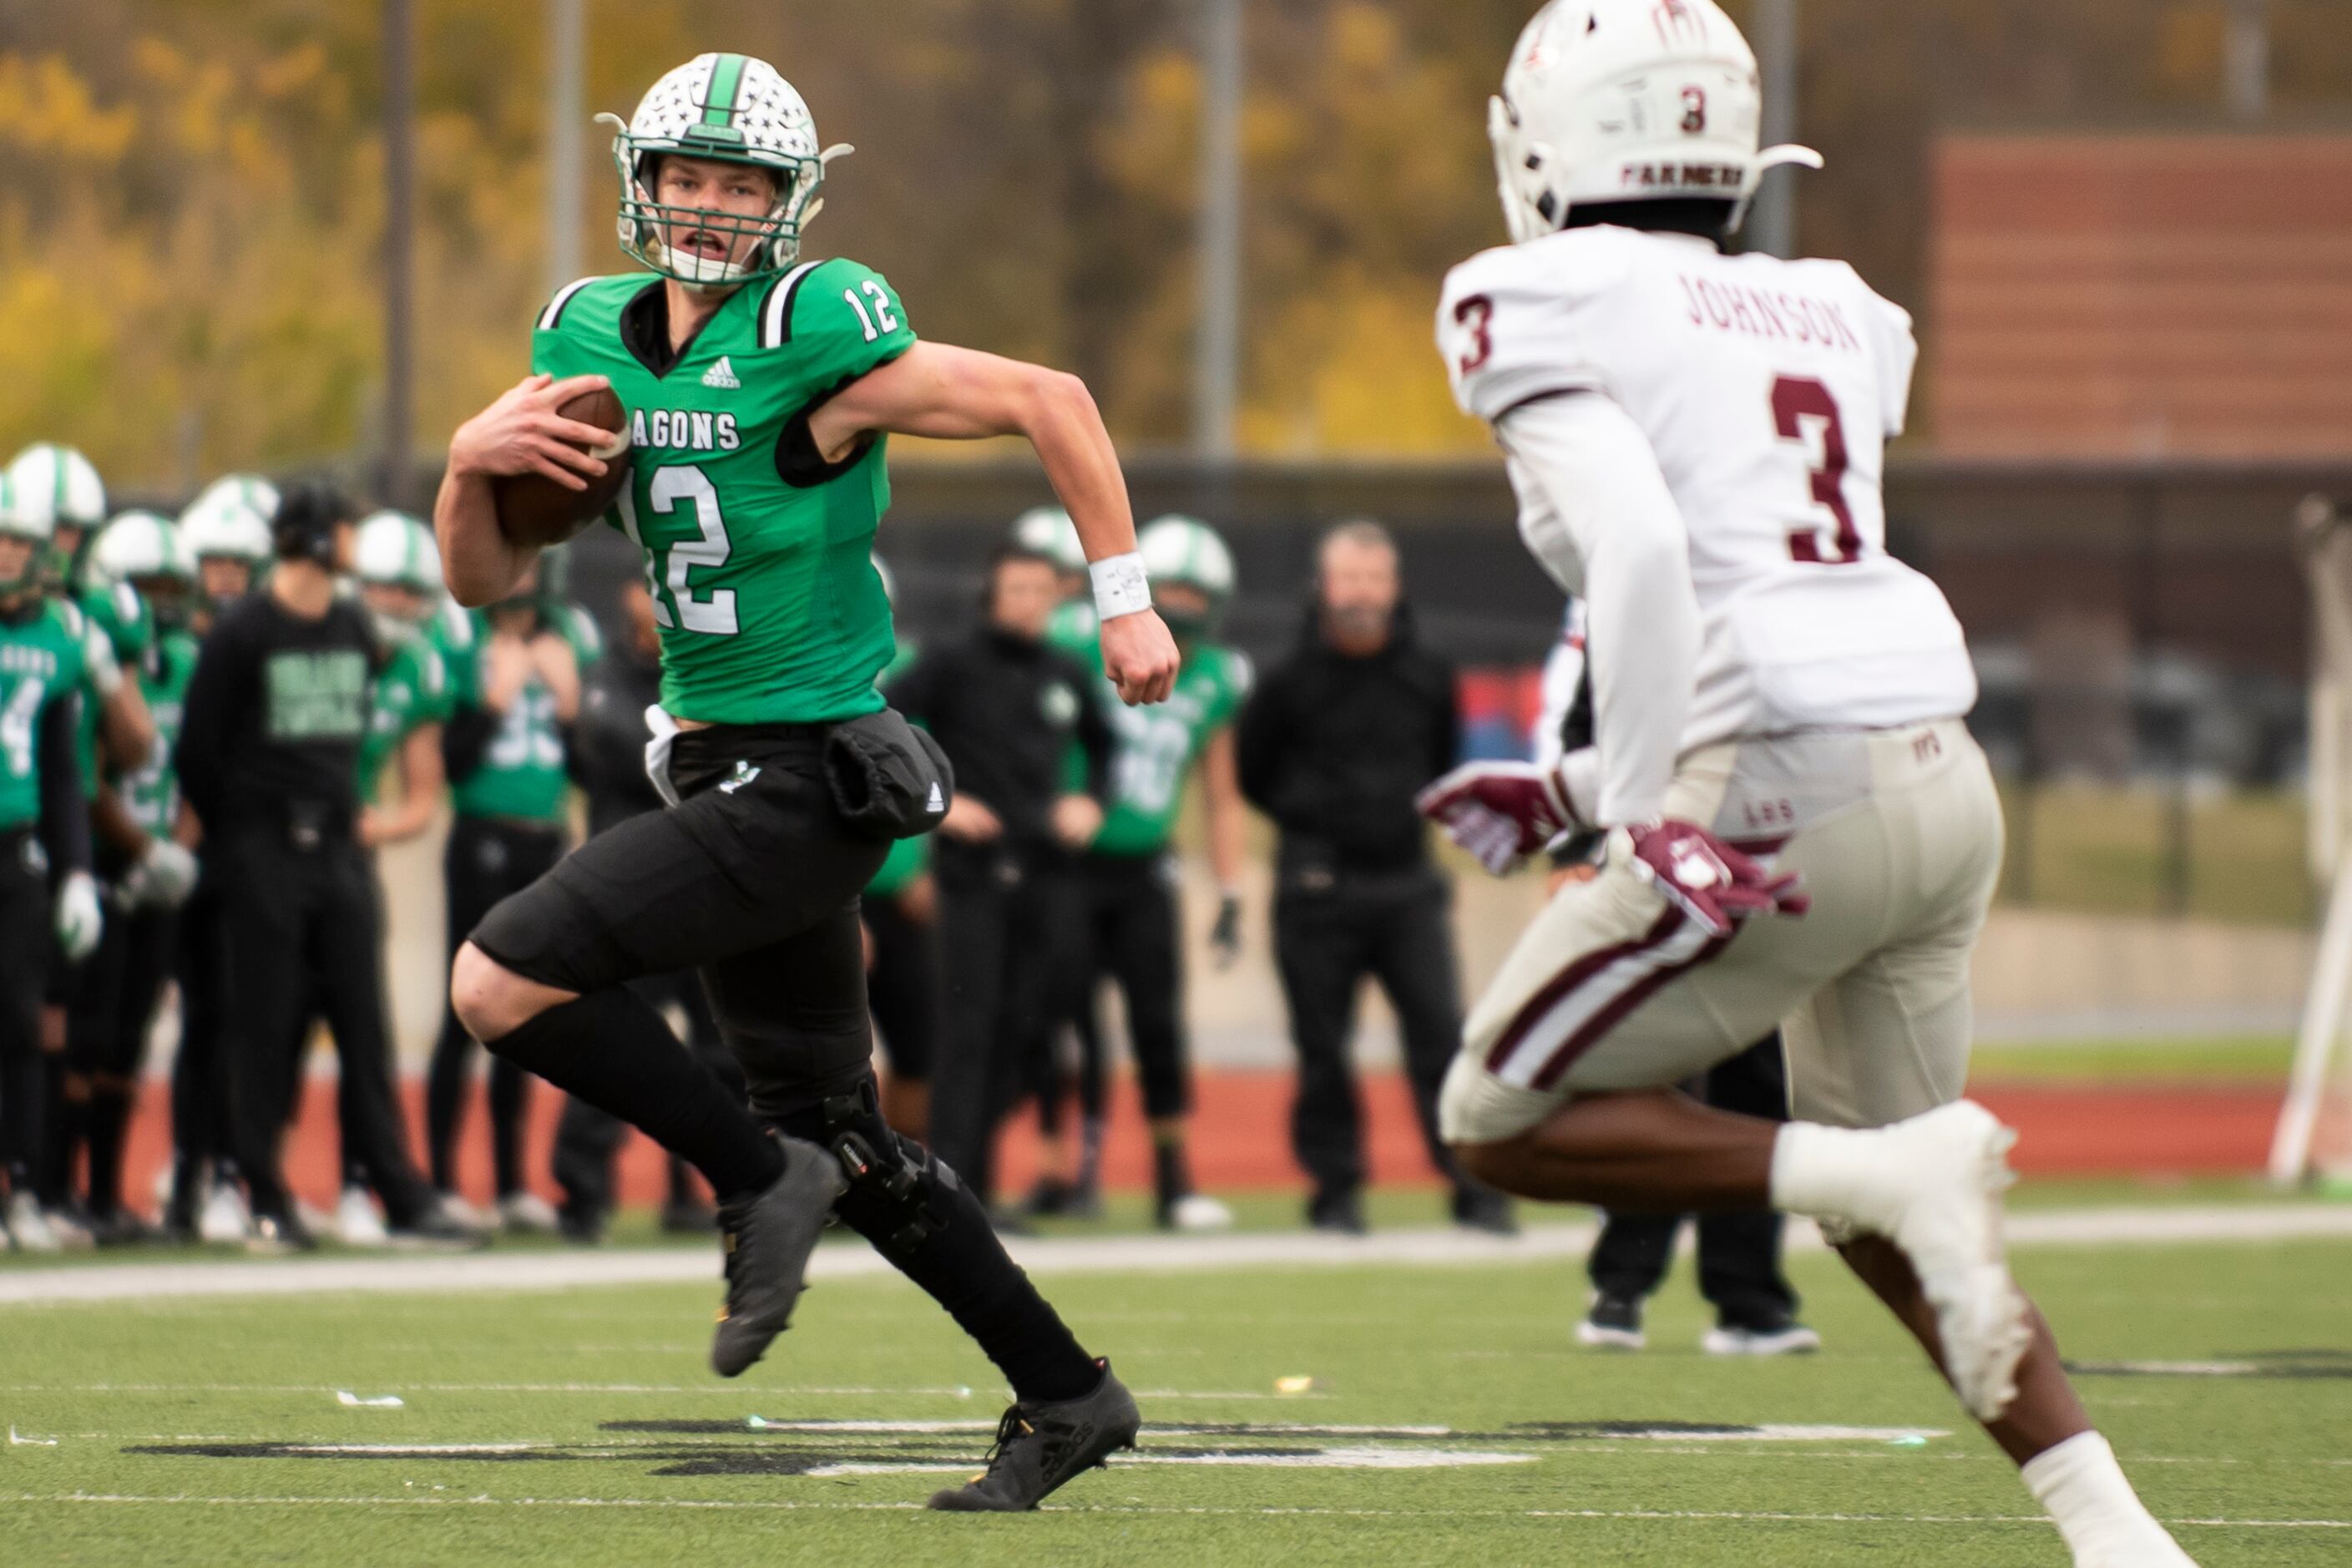 Southlake Carroll junior Kaden Anderson (12) rushes down the field as Lewisville senior...